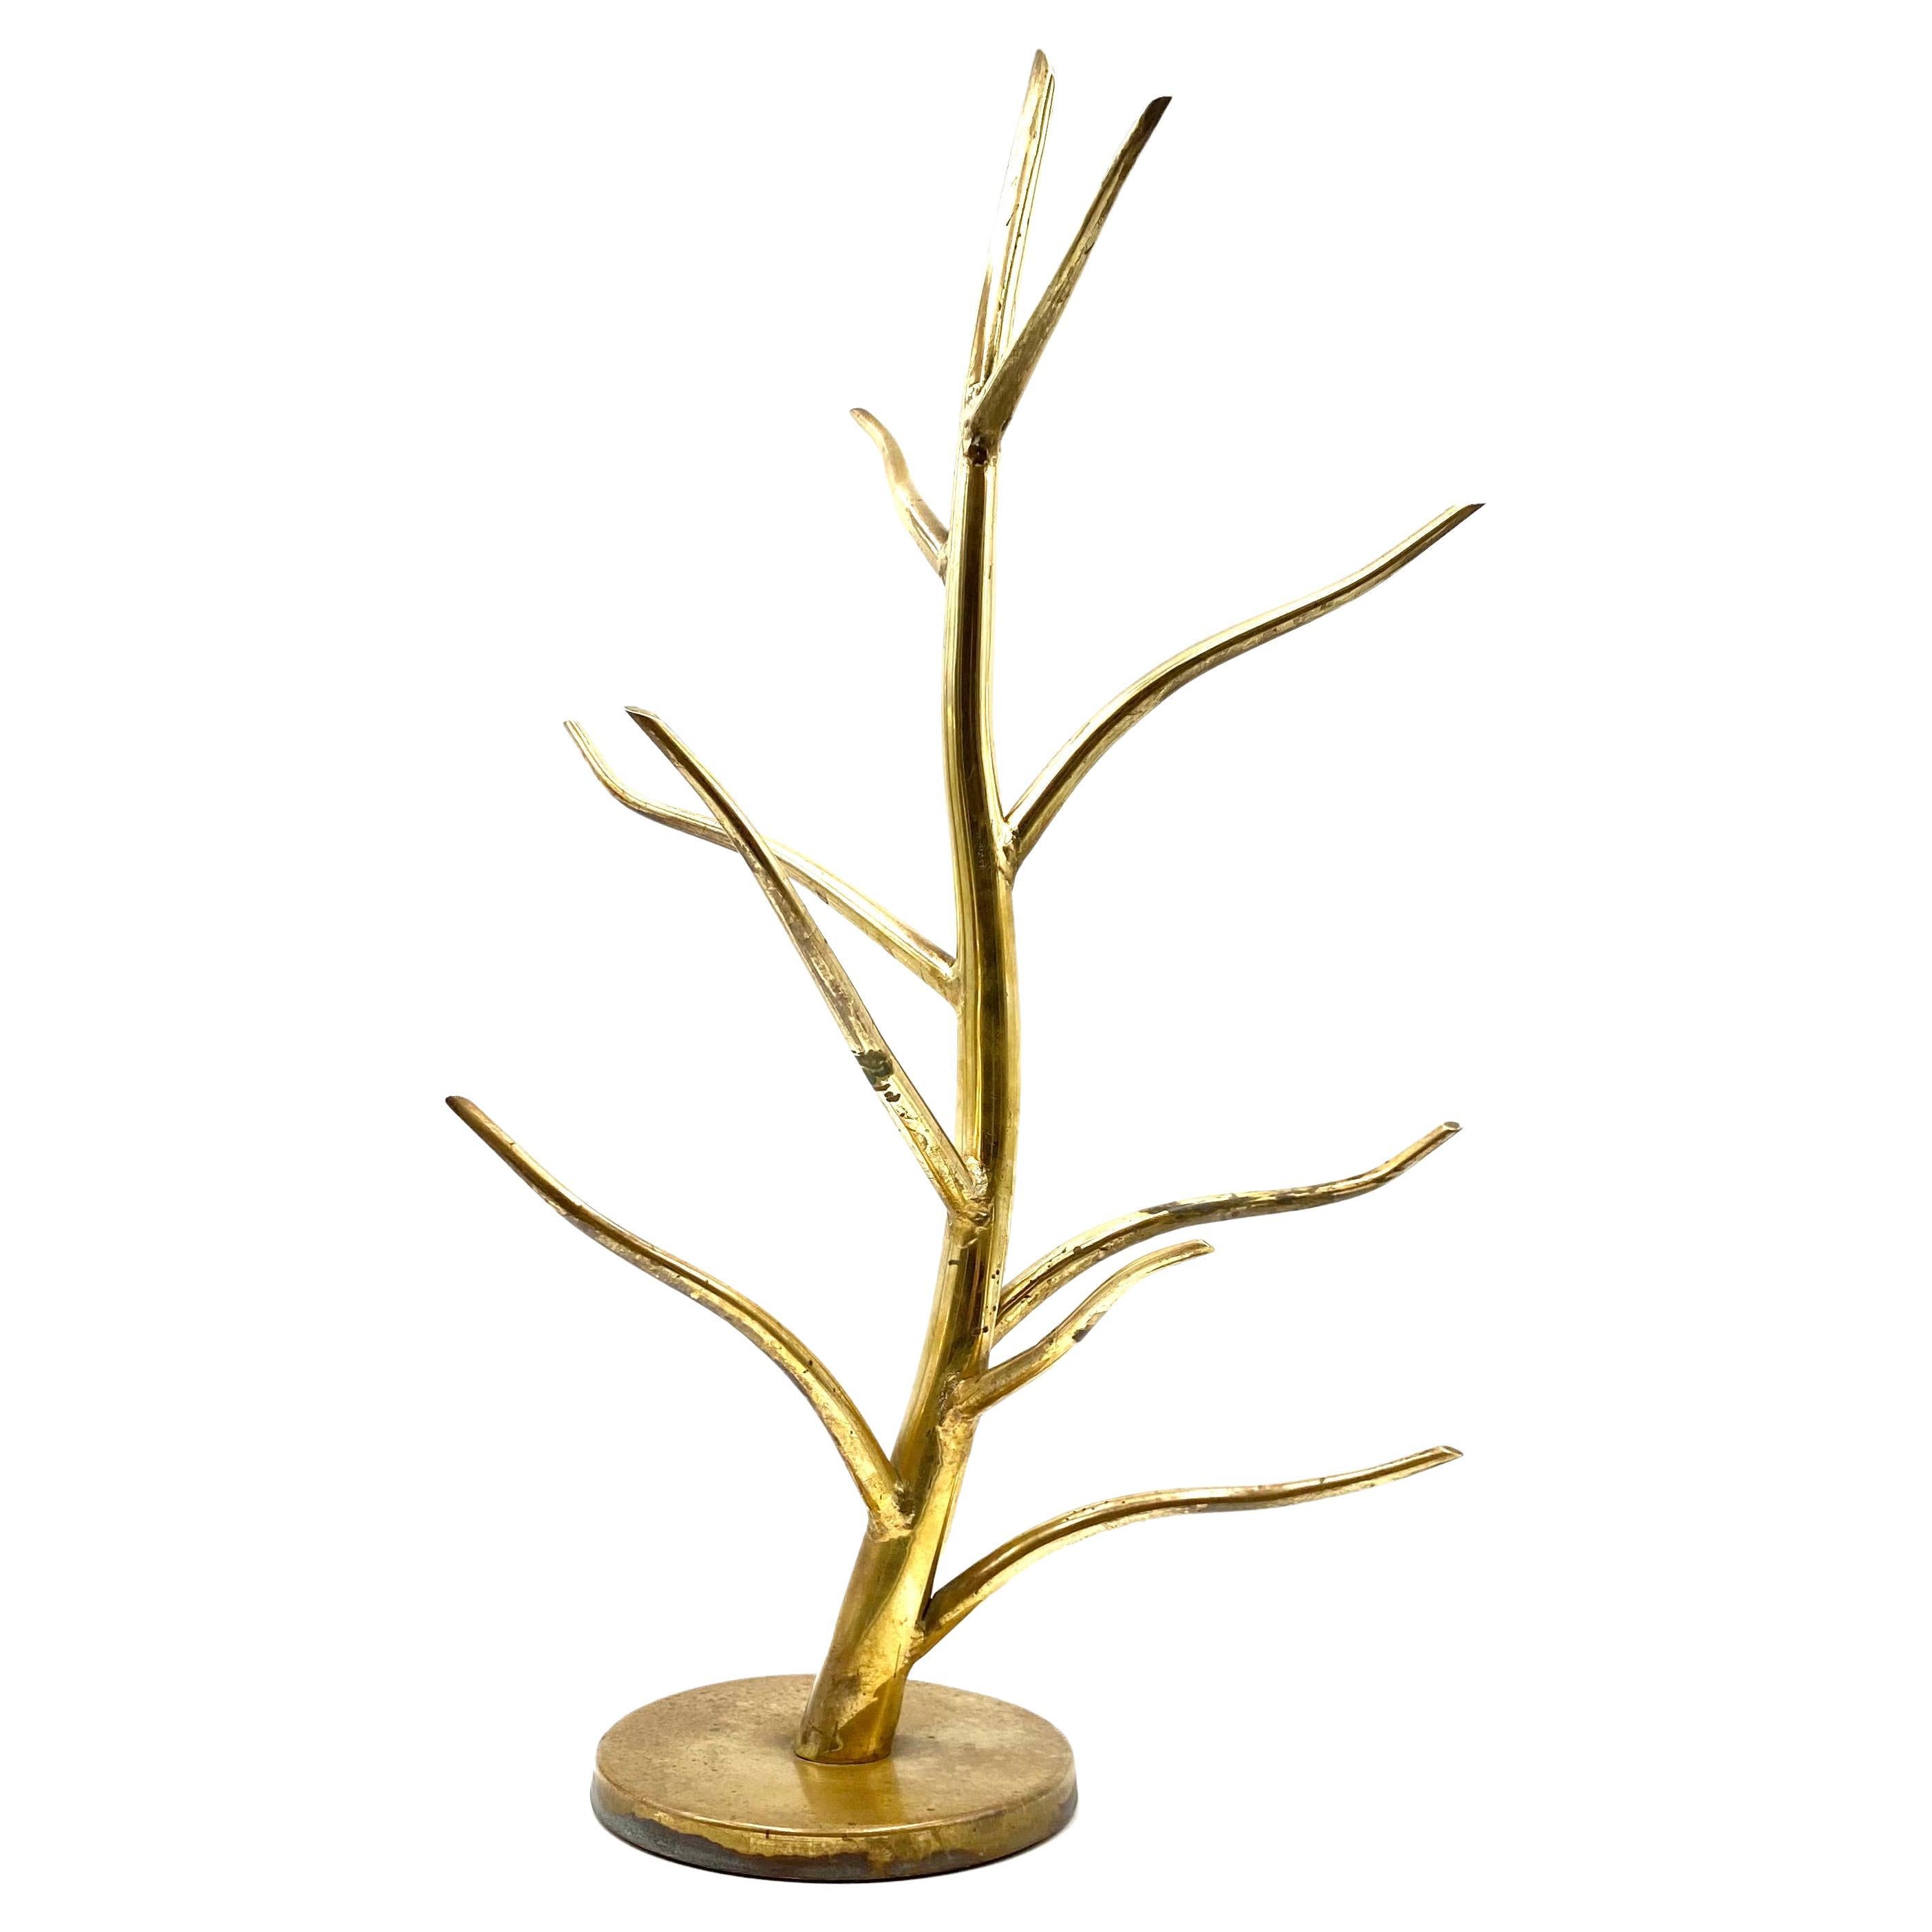 Midcentury Brass Plant-Shaped Stand, Italy, 1970s